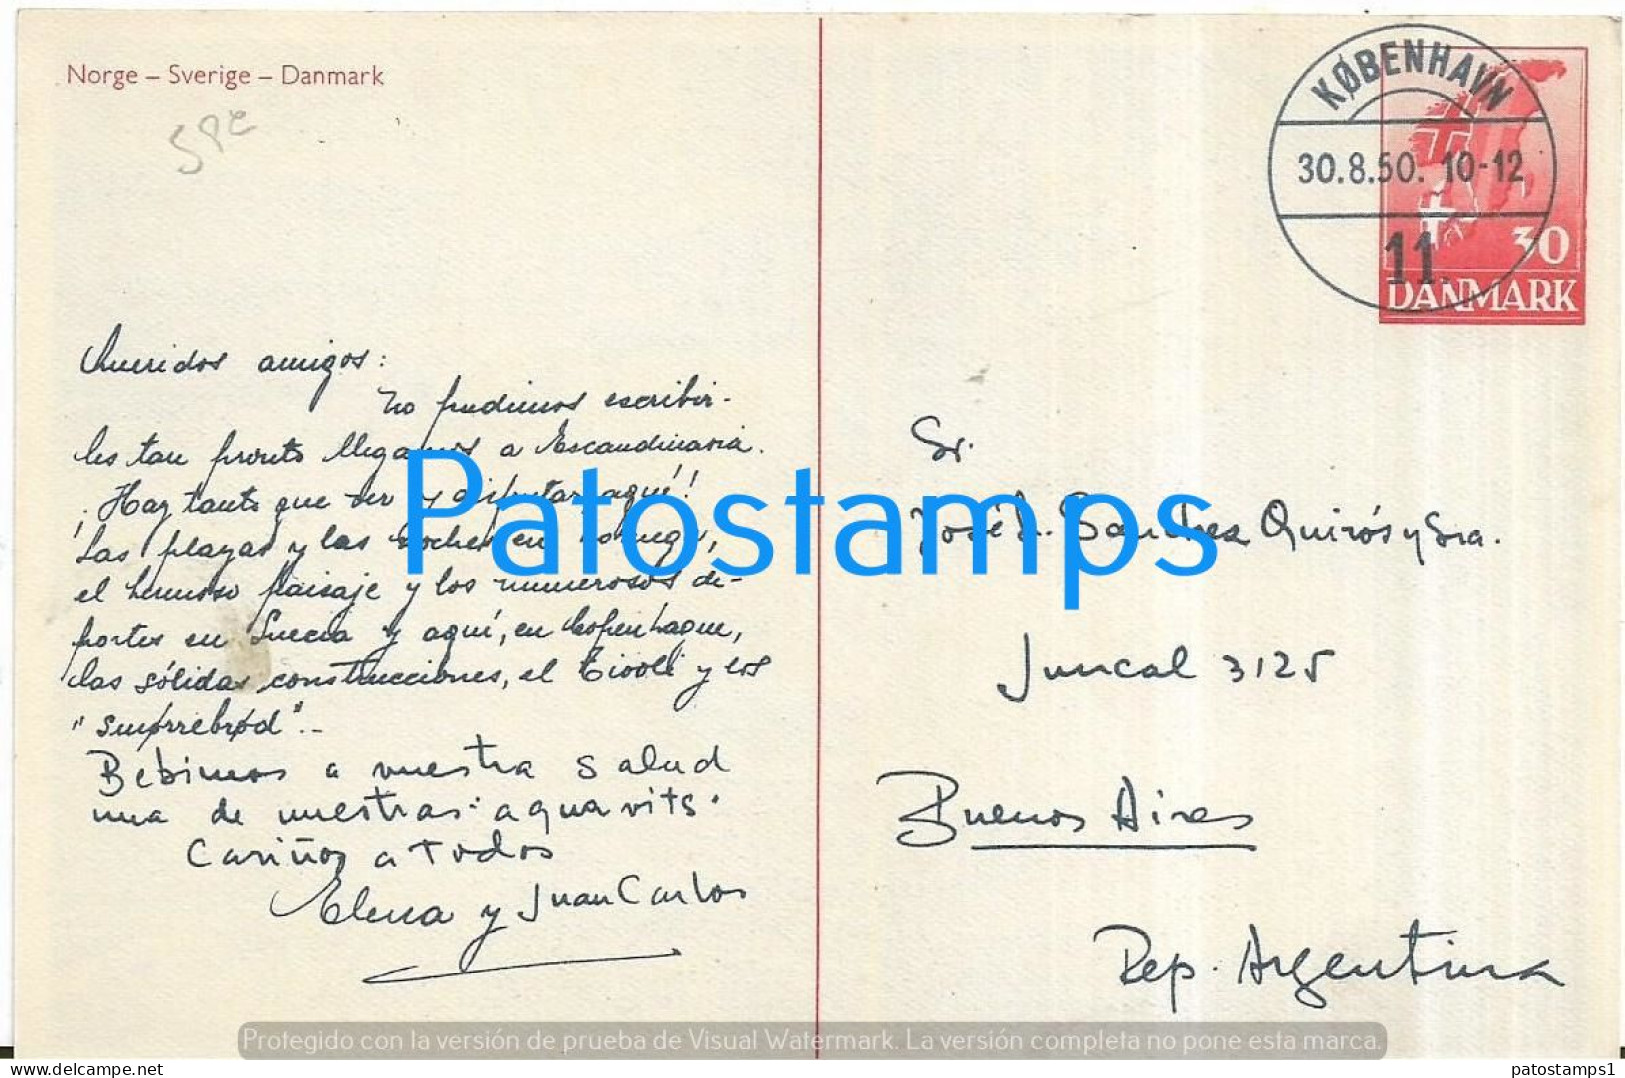 221919 DANMARK DENMARK NORWAY SWEDEN MULTI VIEW CANCEL 1950 CIRCULATED TO ARGENTINA POSTAL STATIONERY POSTCARD - Entiers Postaux